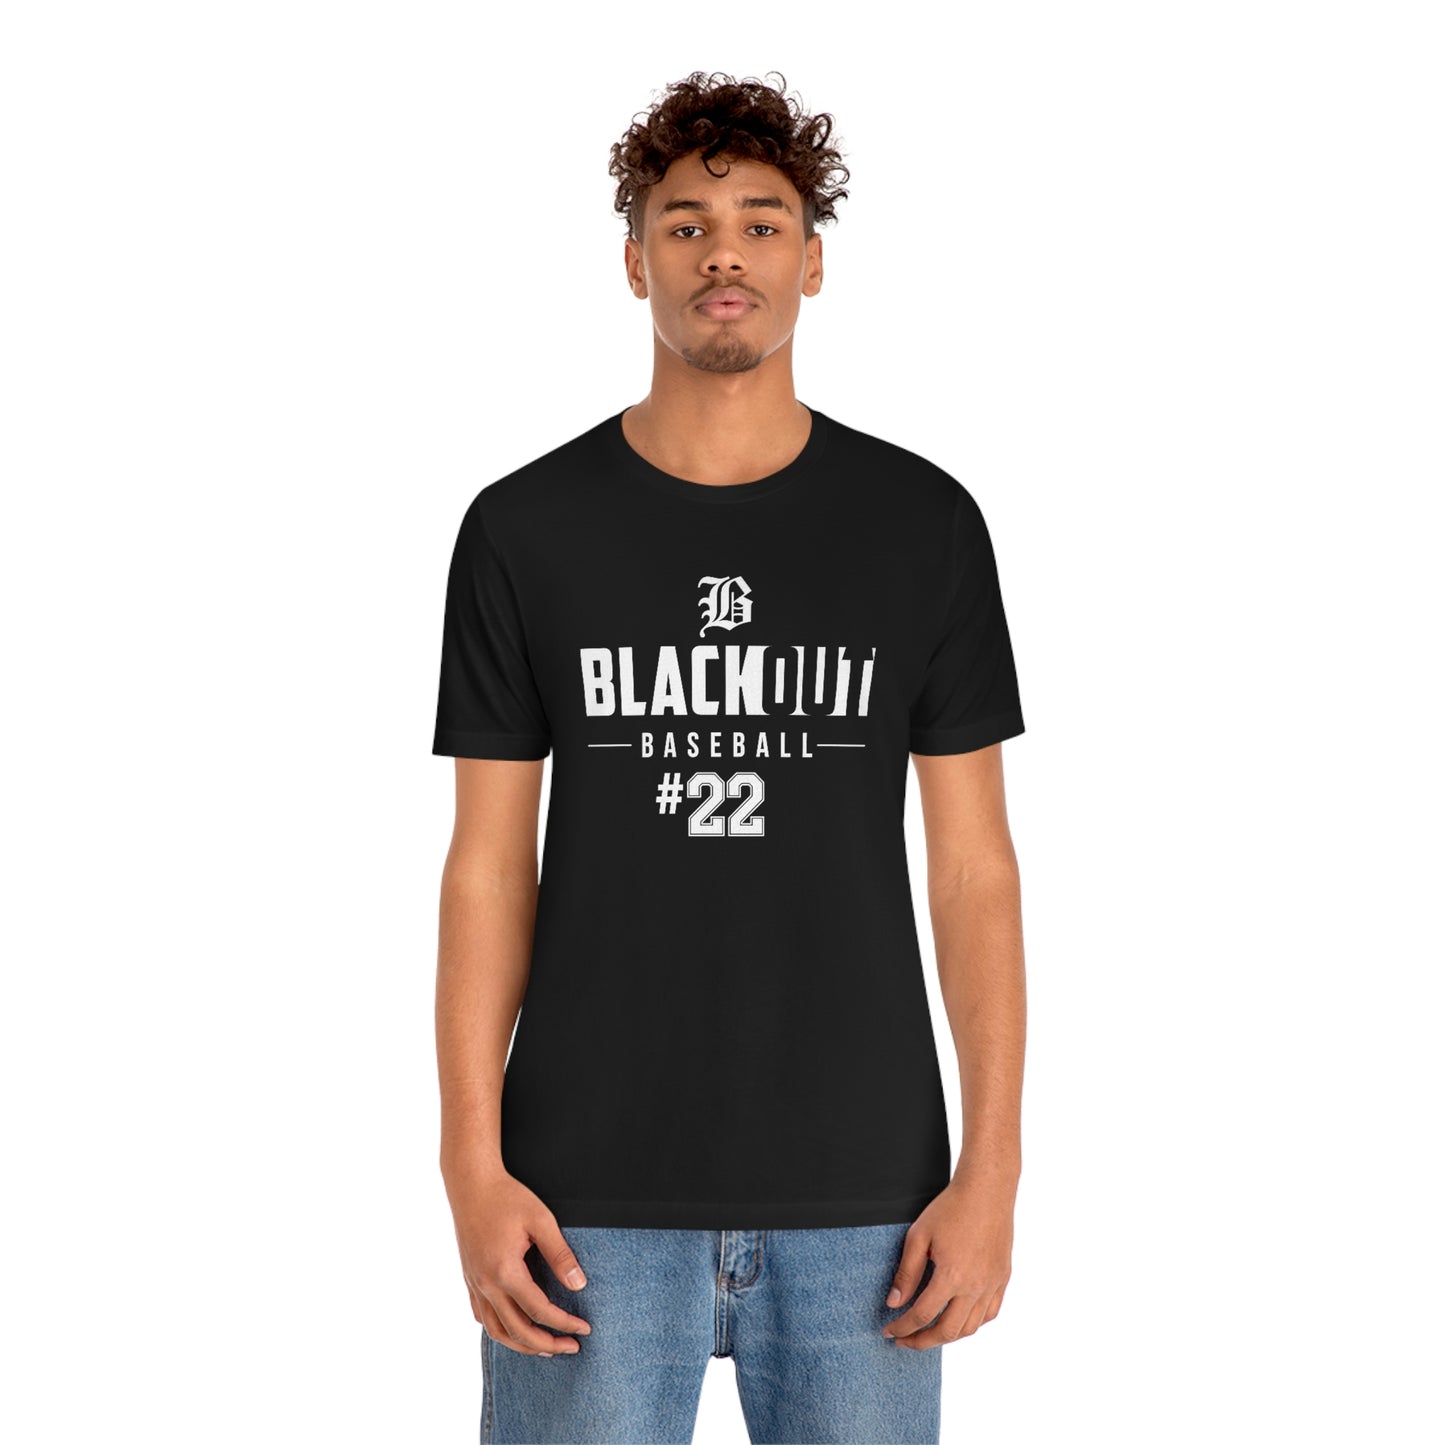 ADULT - PERSONALIZED Number - "Blackout Baseball #00" 100% Cotton T-Shirt - (Black, White, or Gray)